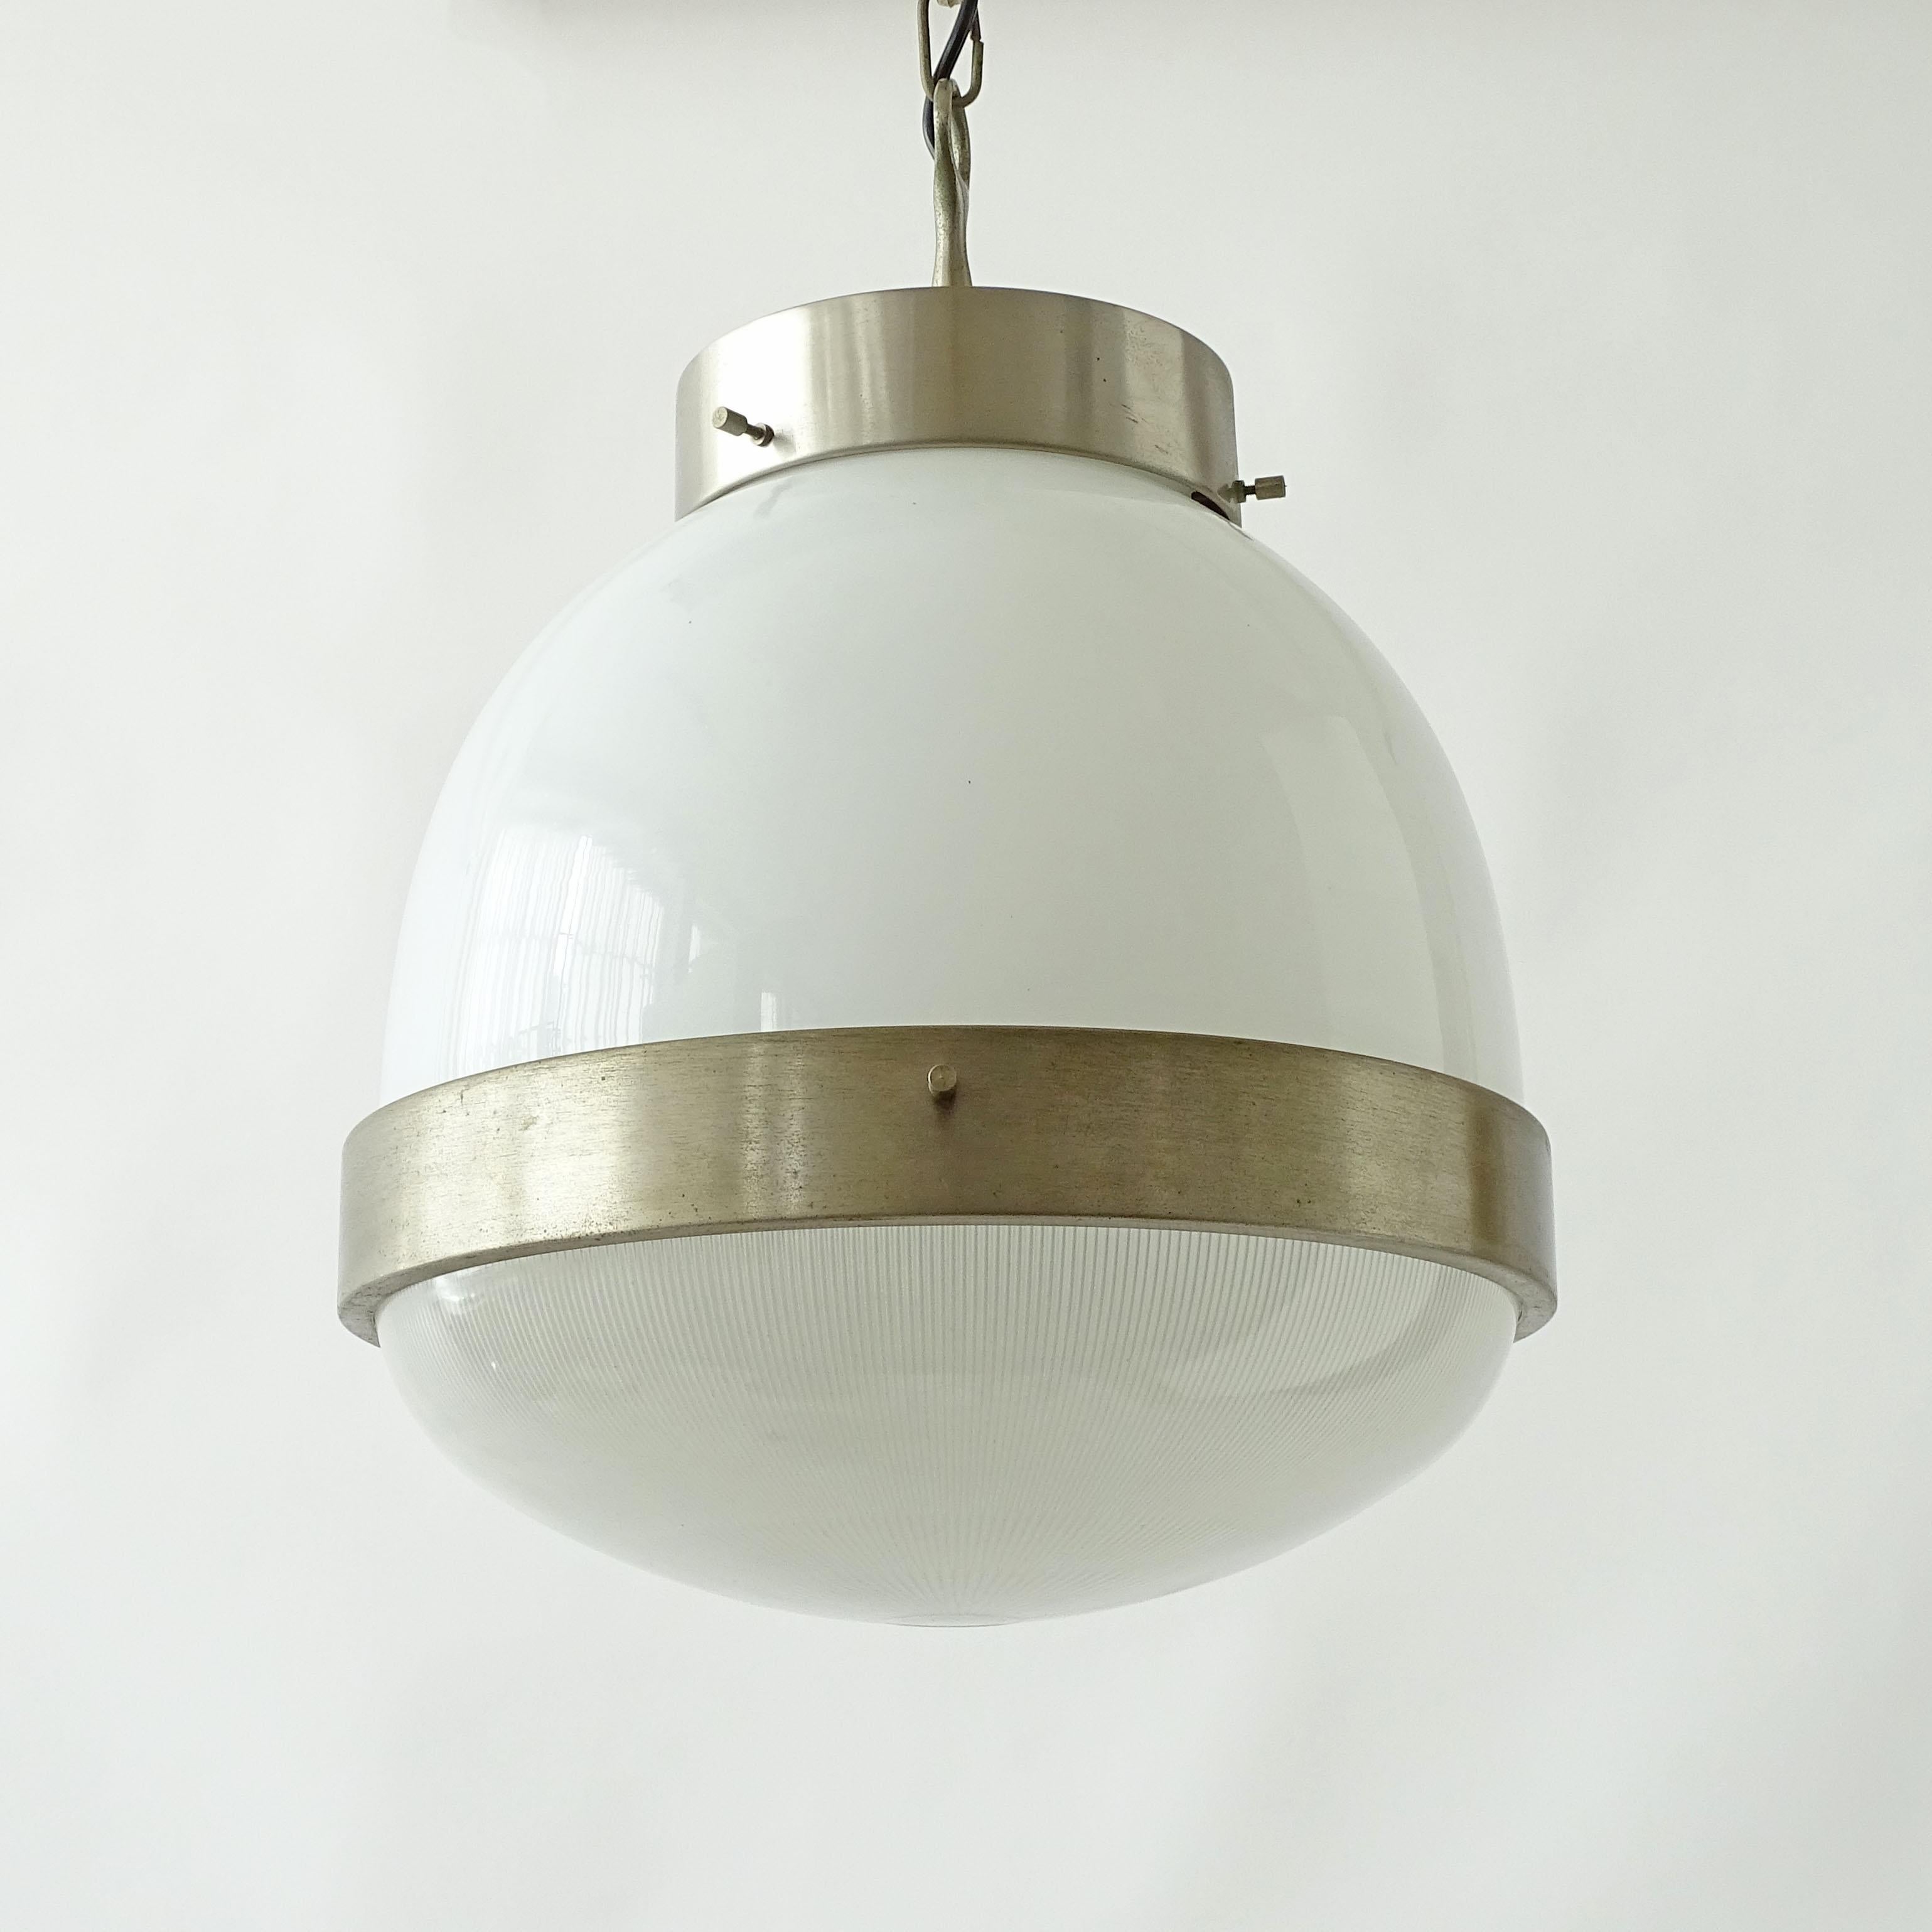 Mid-20th Century Sergio Mazza Pair of Large Delta Ceiling Lamps for Artemide, Italy 1960s For Sale